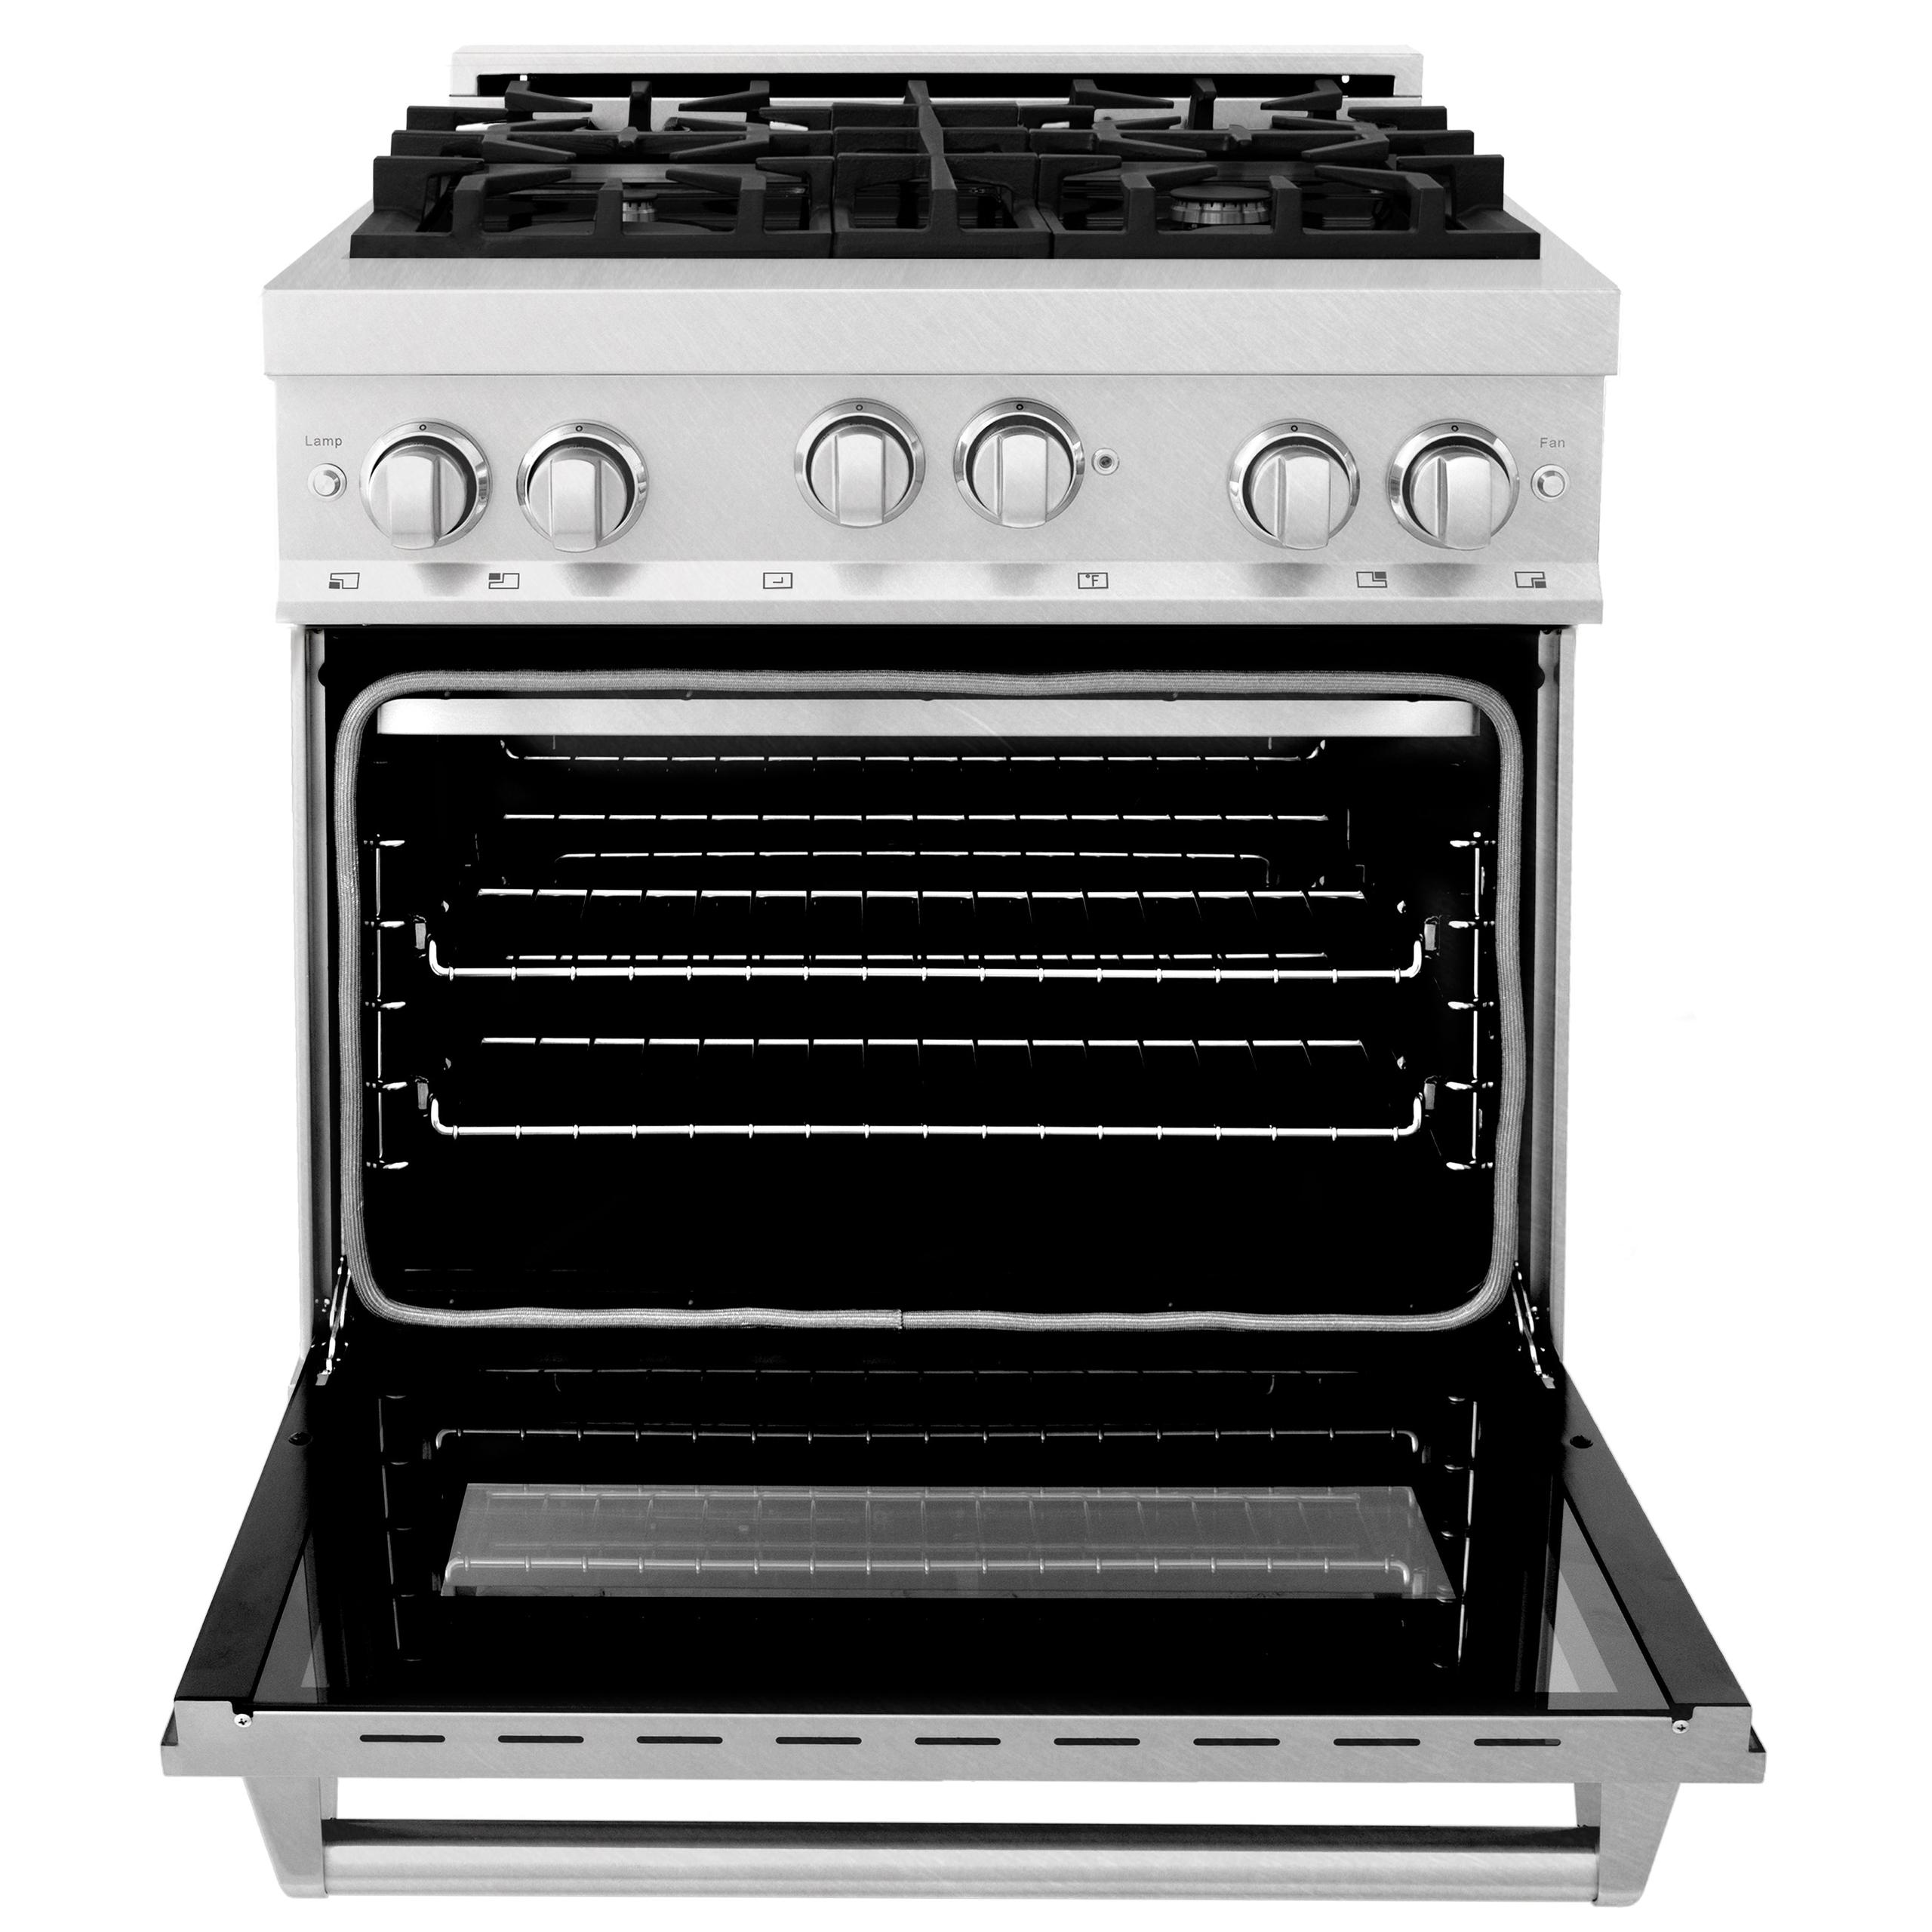 ZLINE KITCHEN AND BATH RGSBLM30 ZLINE 30" 4.0 cu. ft. Range with Gas Stove and Gas Oven in DuraSnow R Stainless Steel with Color Door Options Color: Black Matte